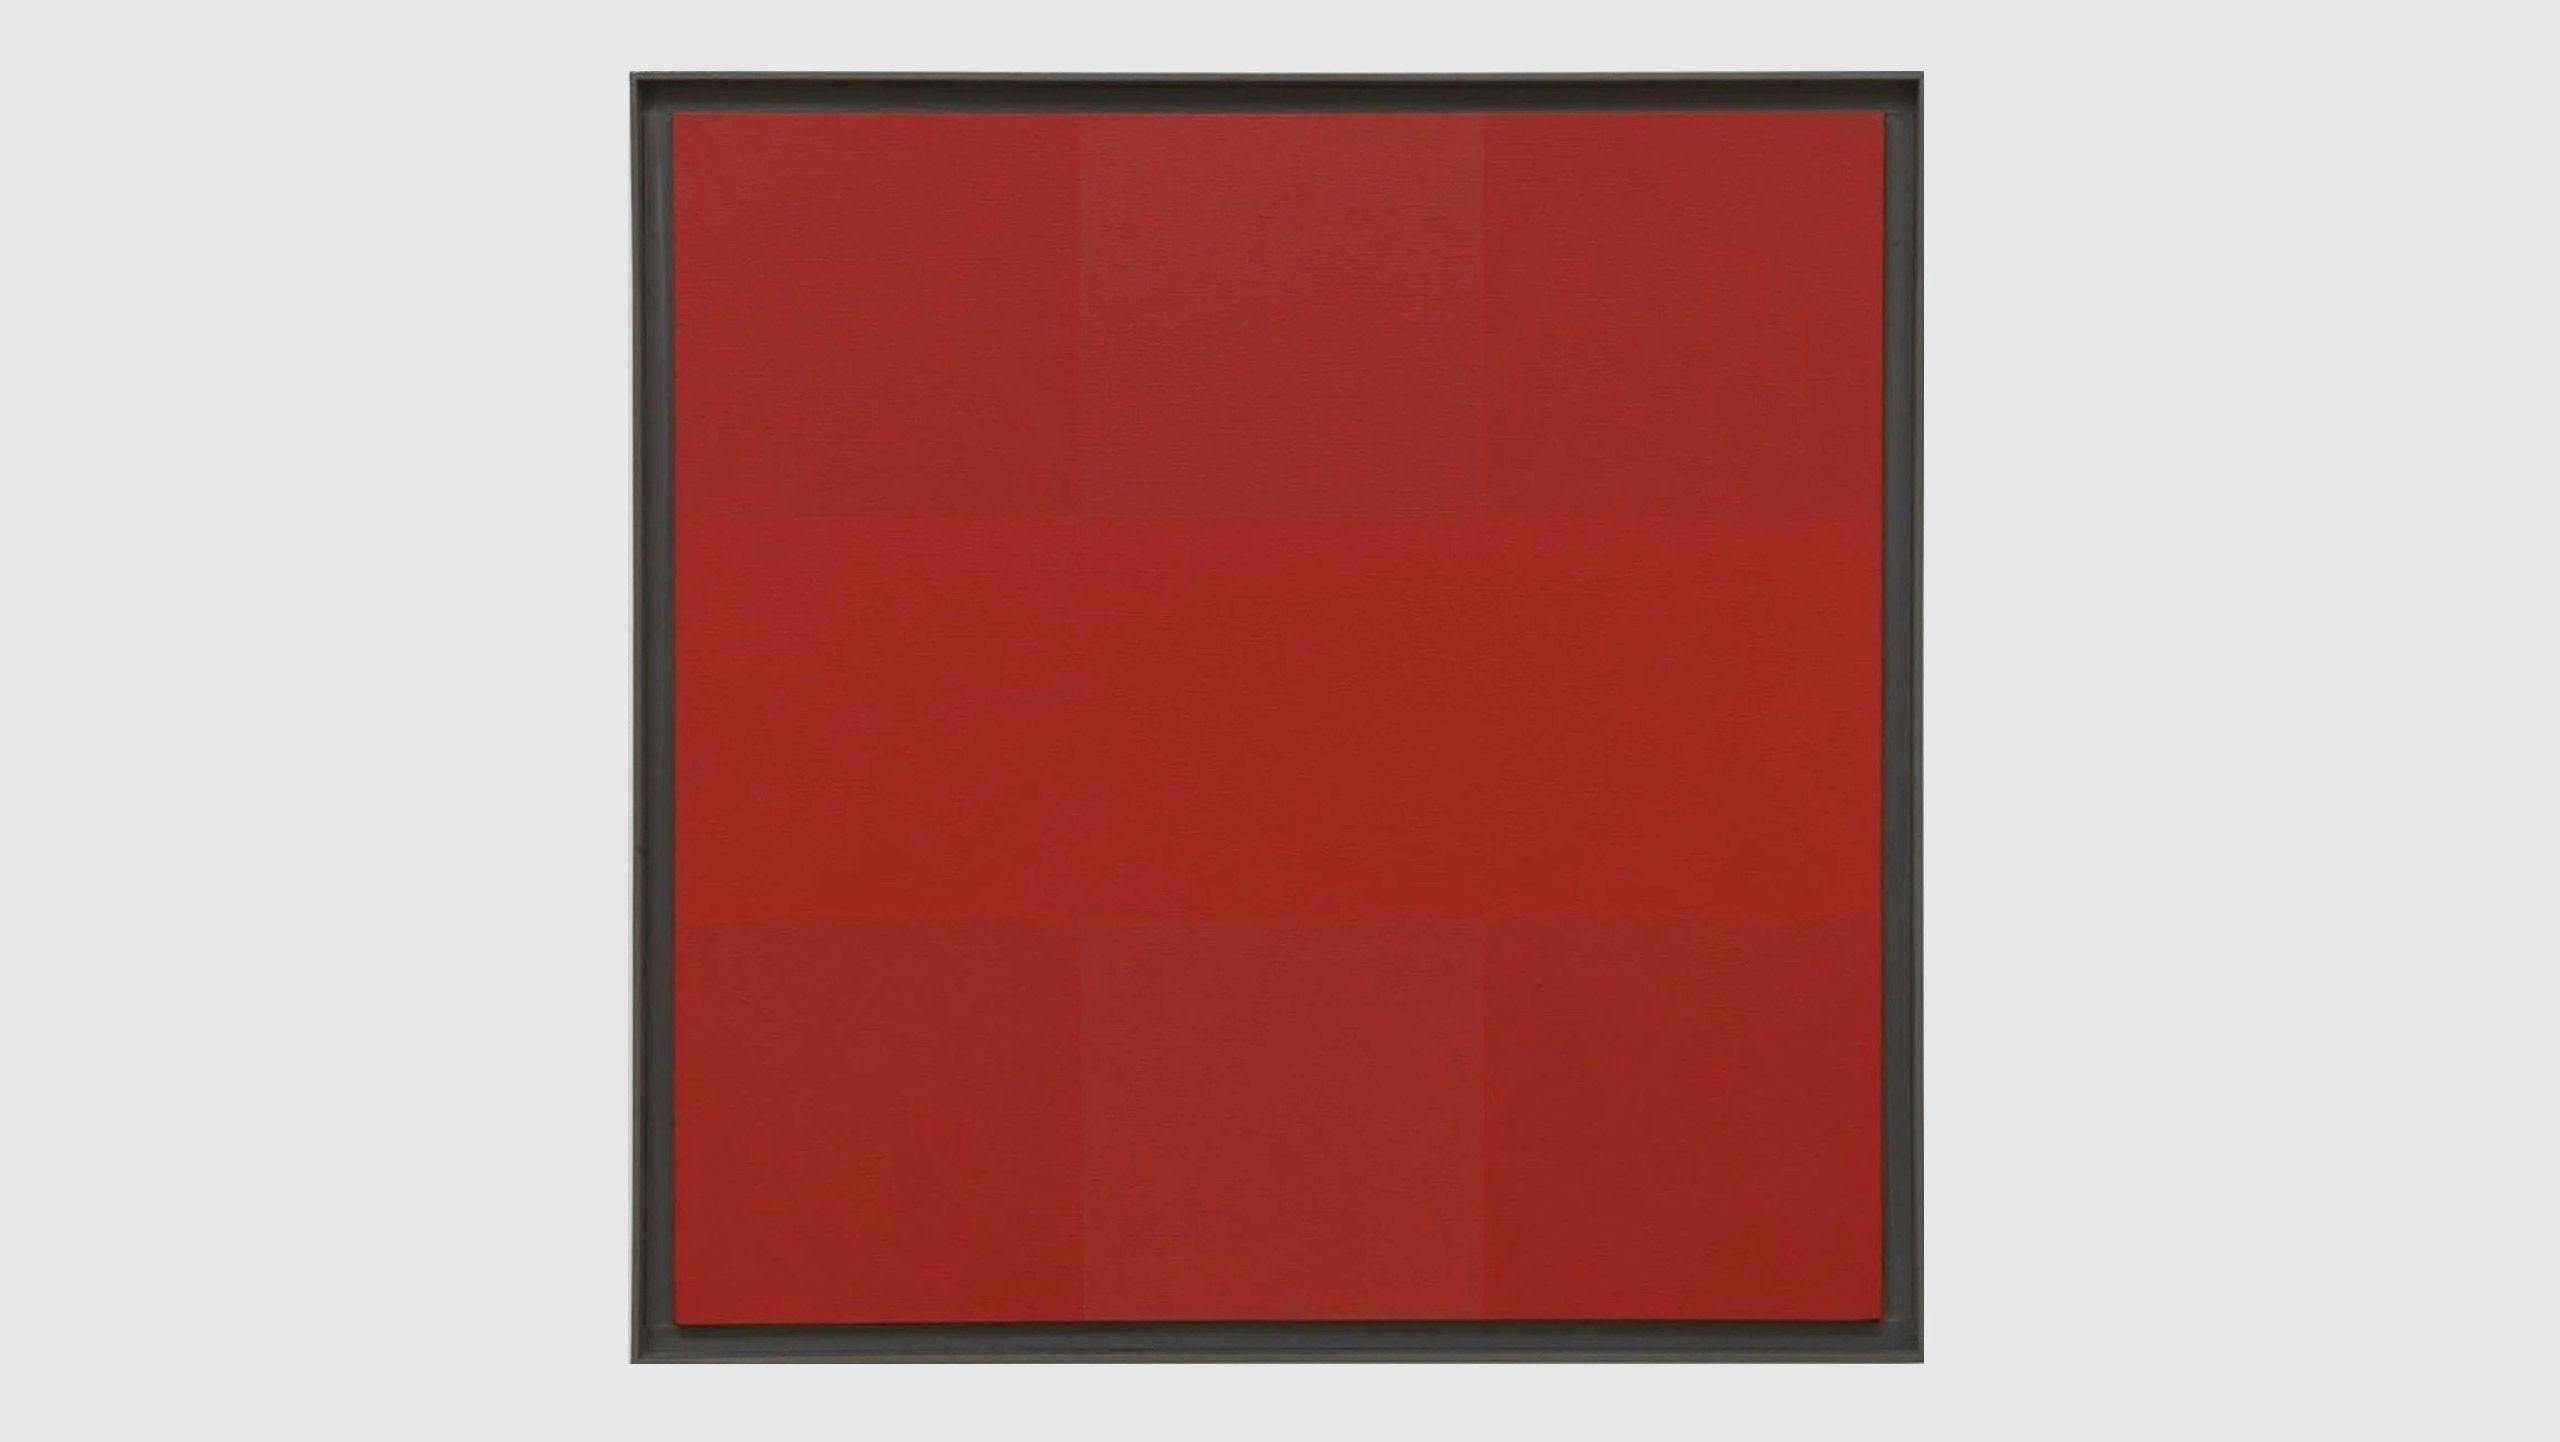 A painting by Ad Reinhardt, titled Abstract Painting, Red, dated 1953.